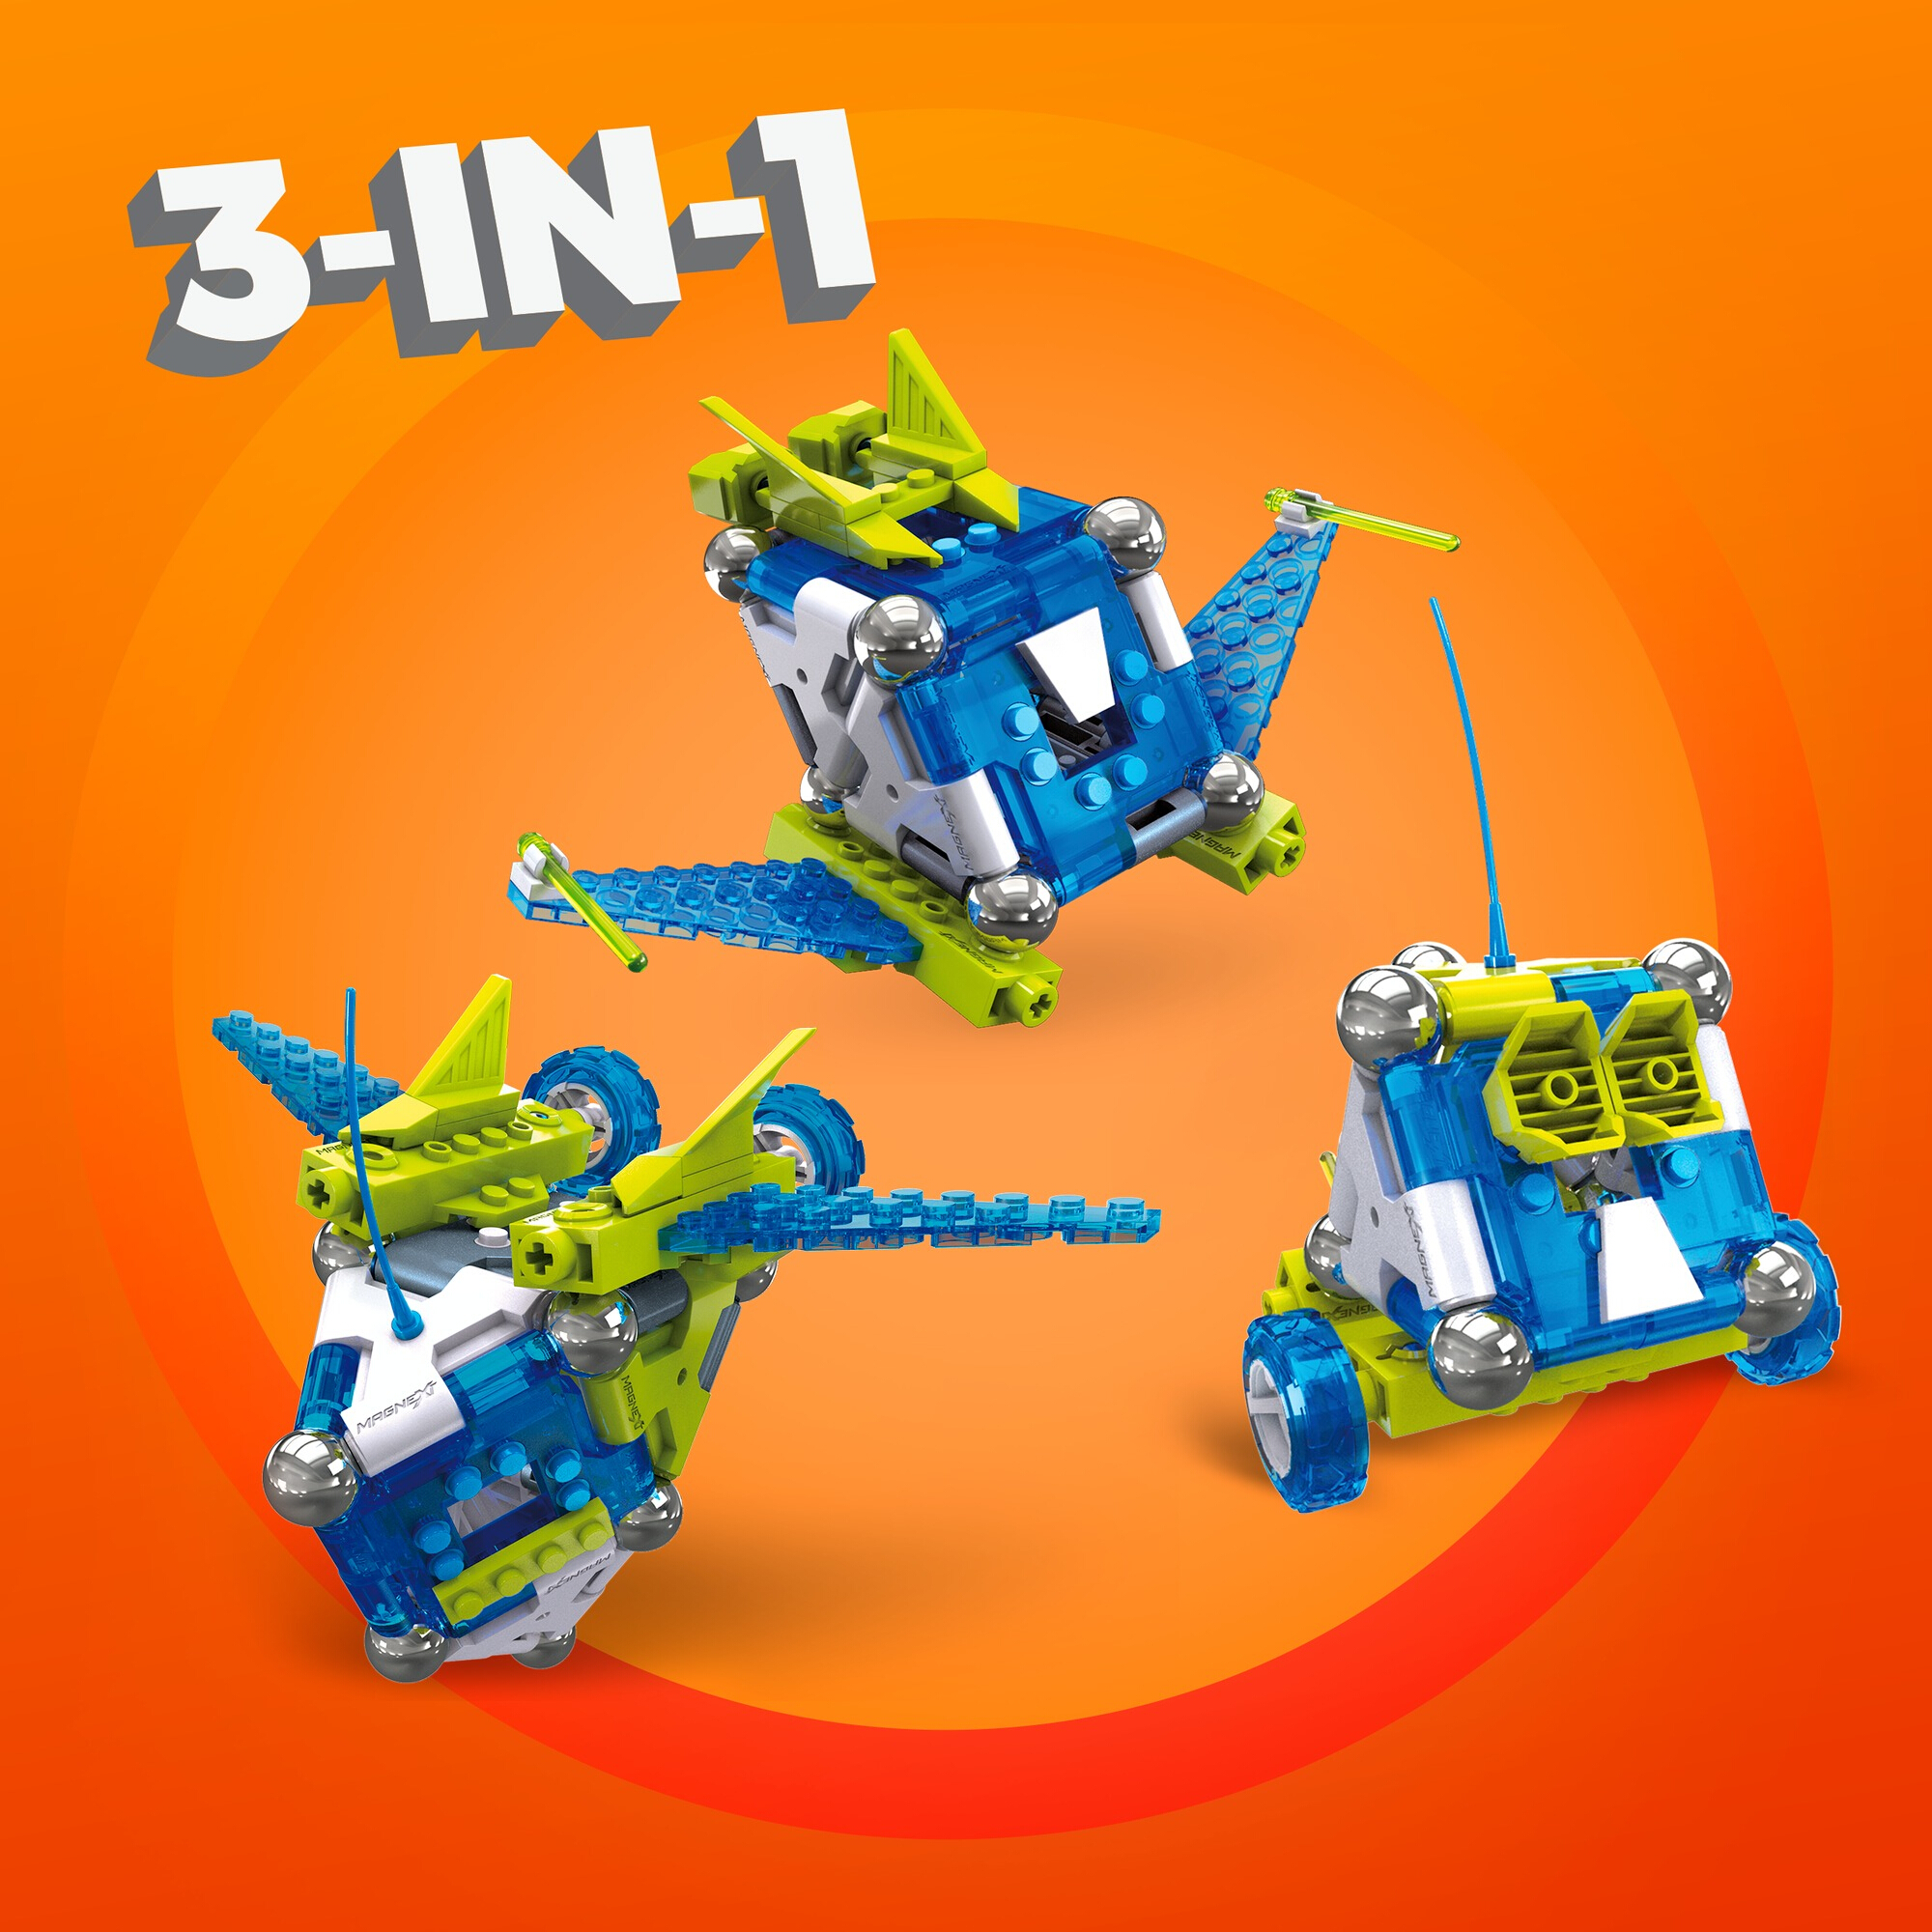 Mega Construx Magnext 3-In-1 Mag-Rockets Buildable Toy for Kids 6 Years and Up - image 4 of 6